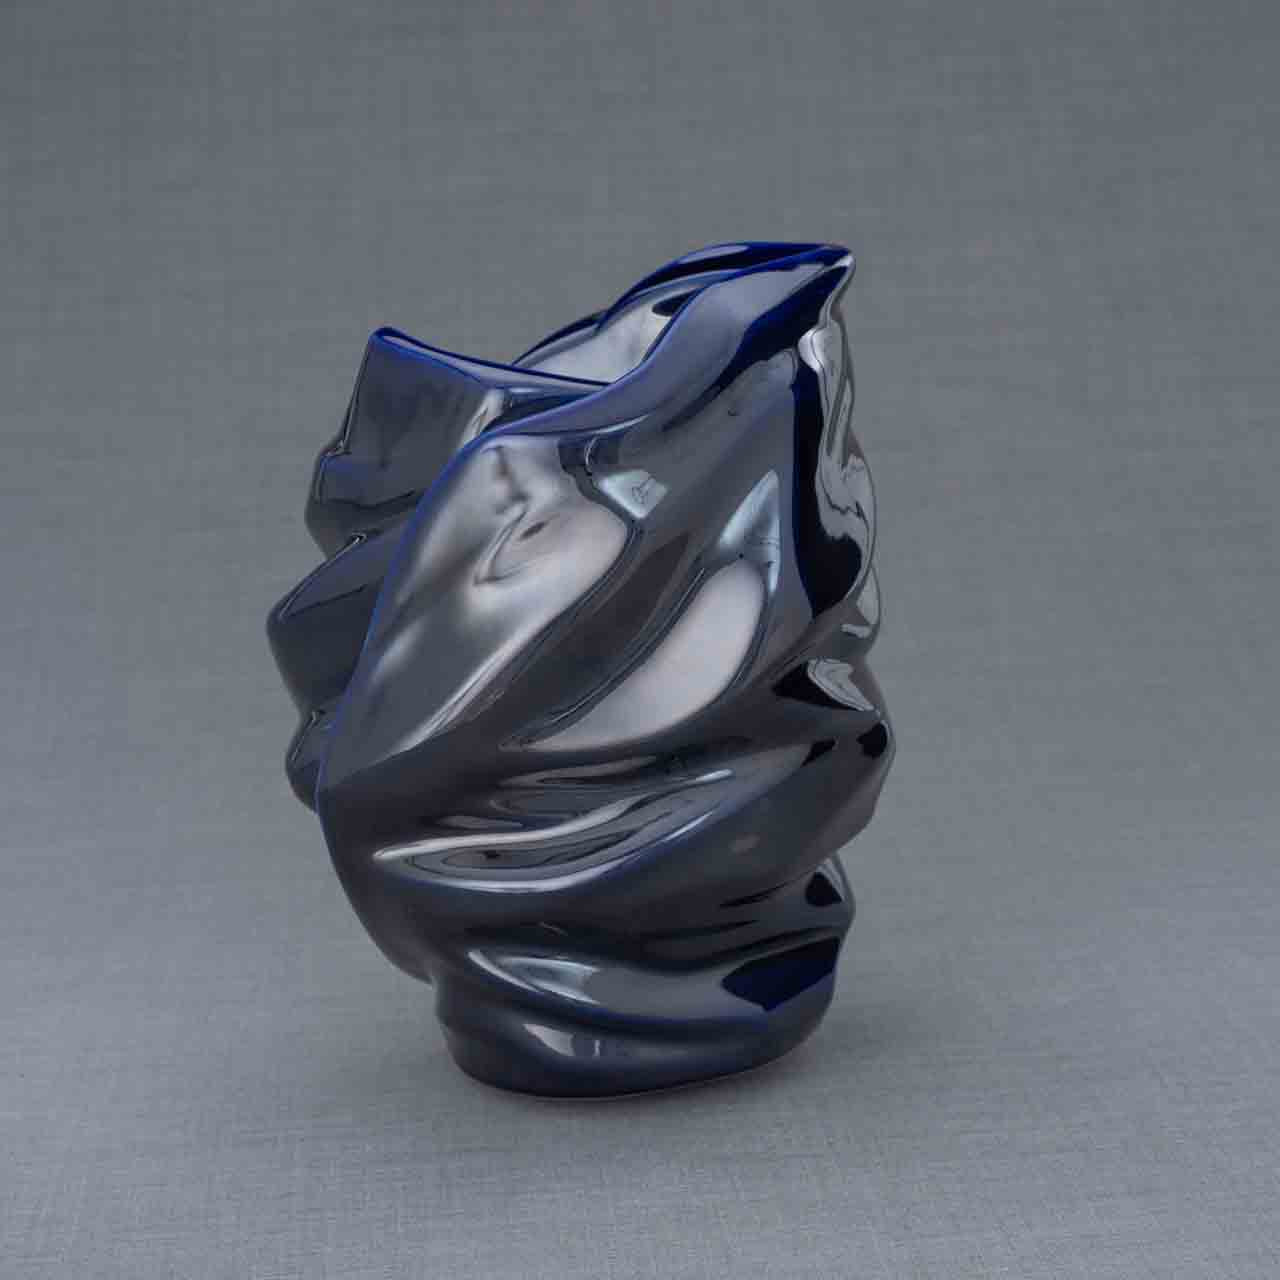 Light Adult Cremation Urn for Ashes in Metallic Blue